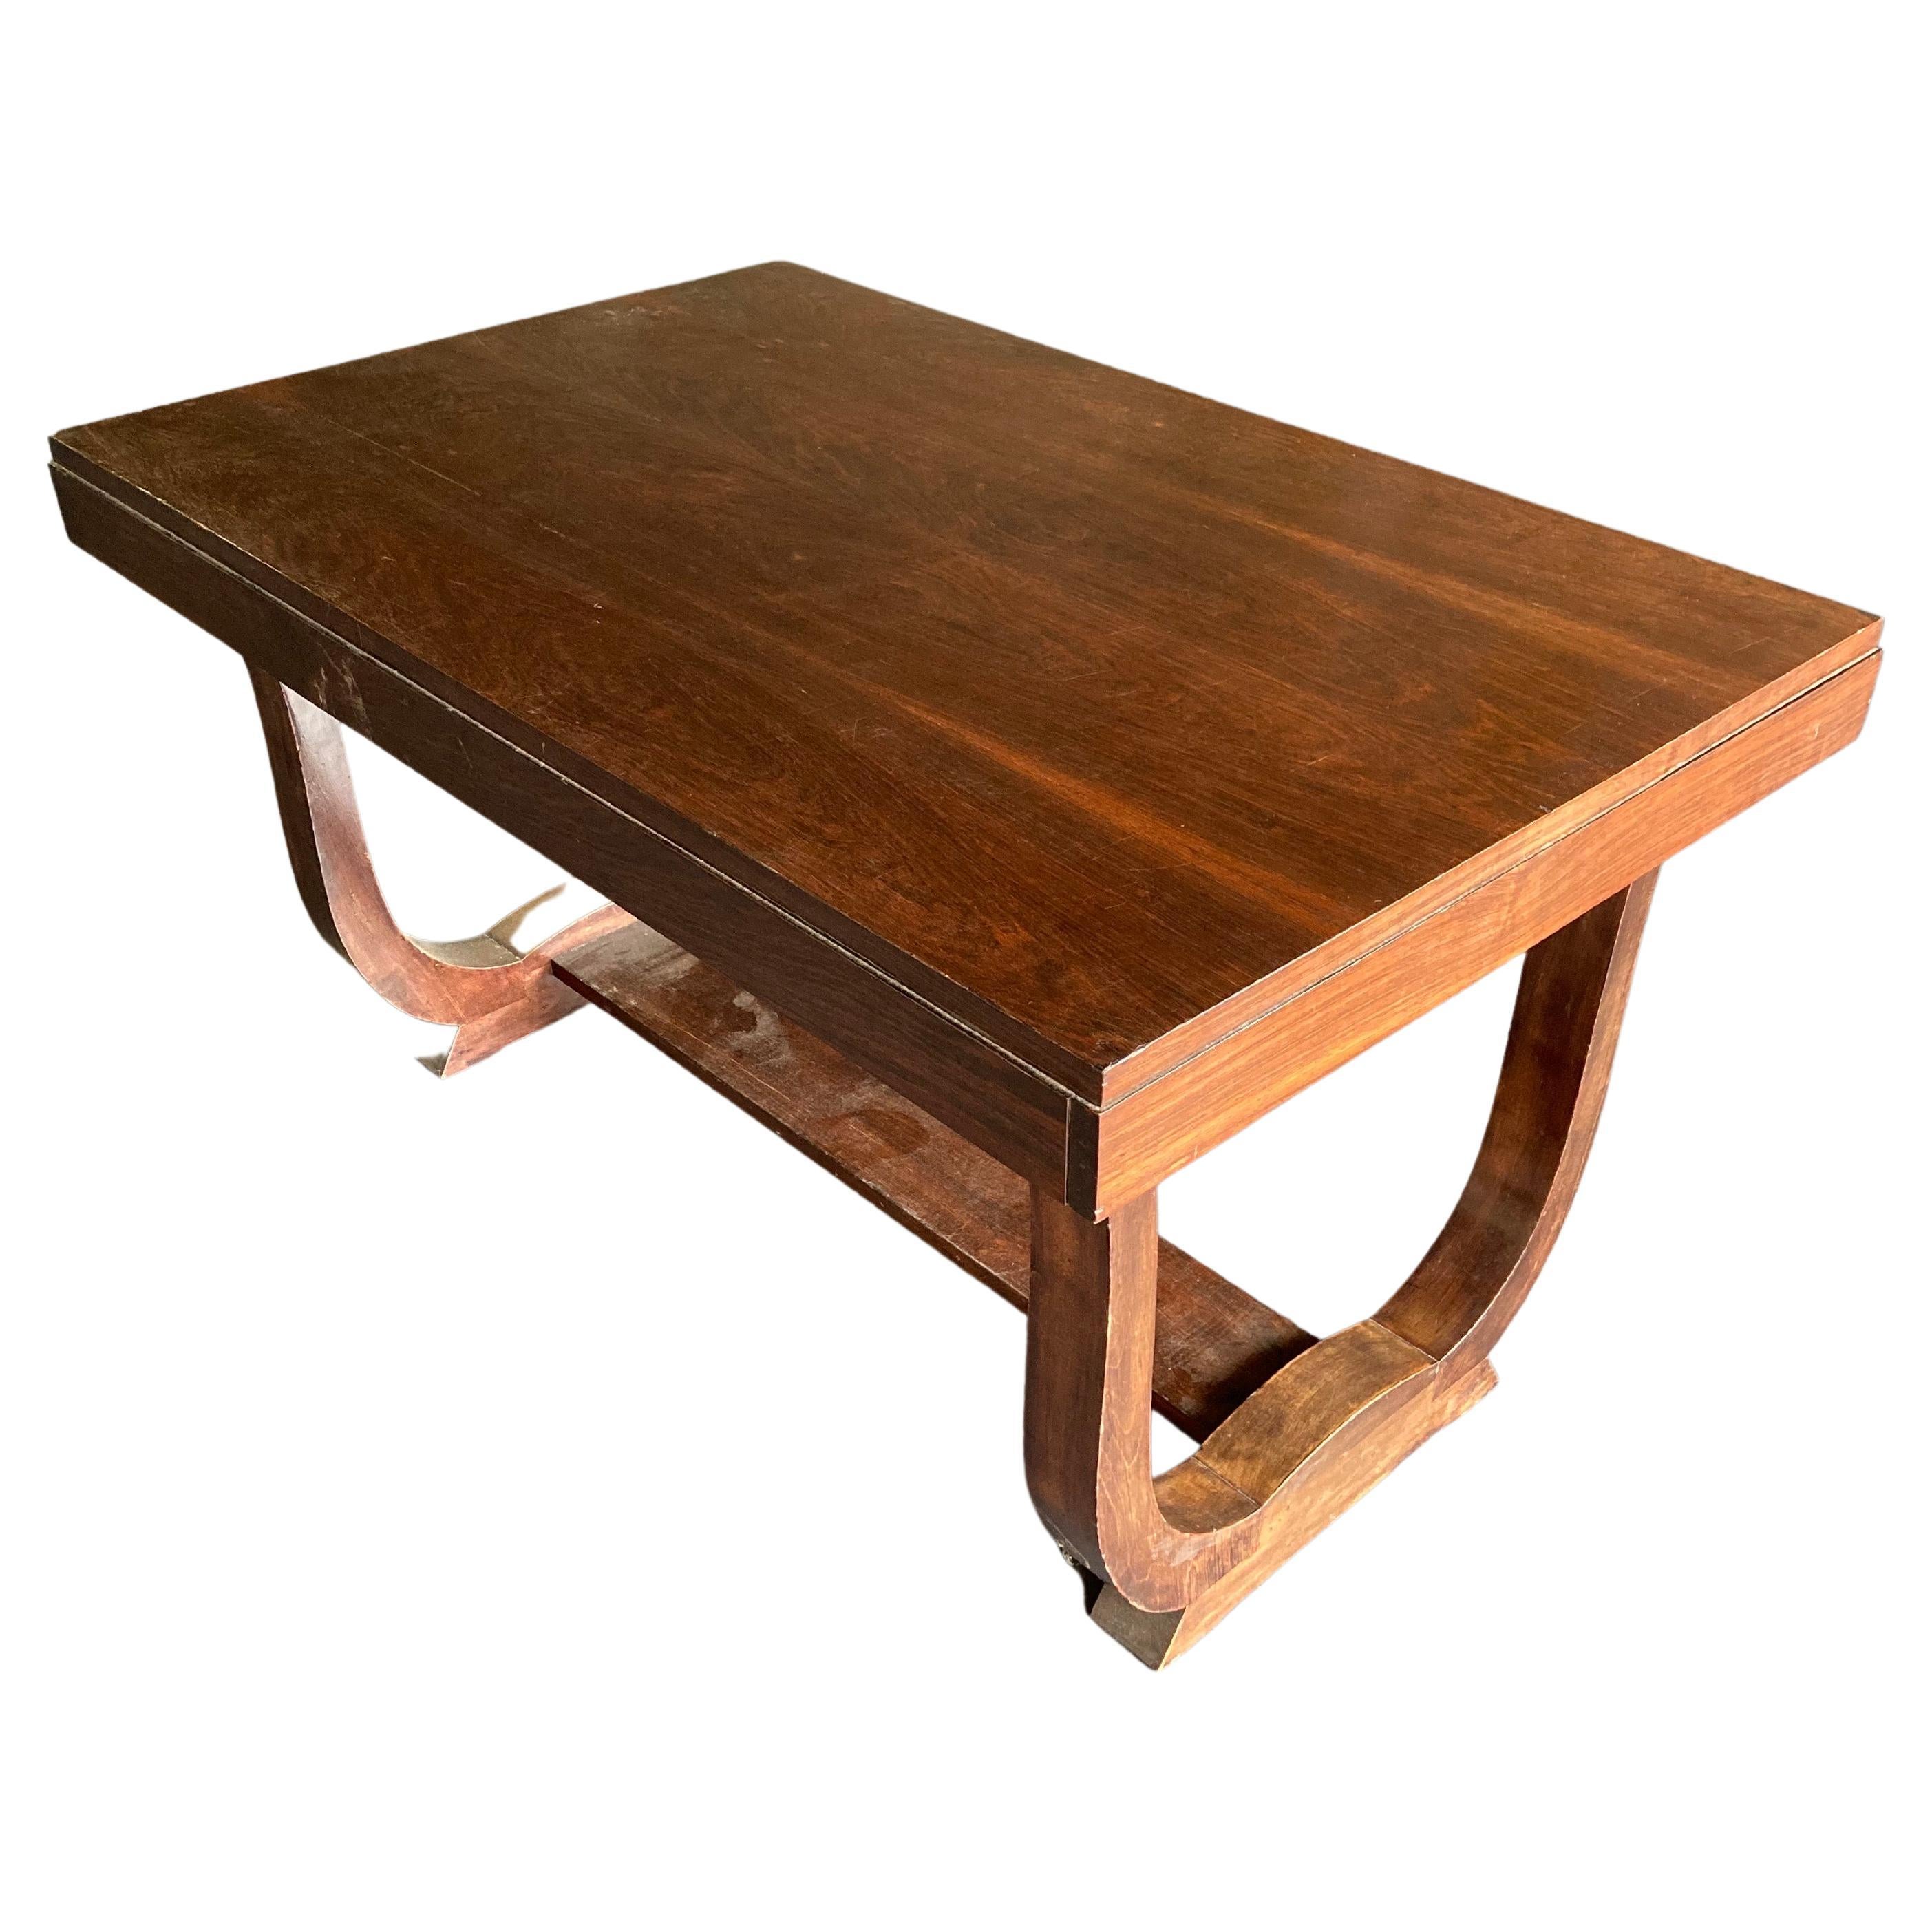 1930's Art Deco Dining Occasional or Hall Table by Maison Dominique, France. For Sale